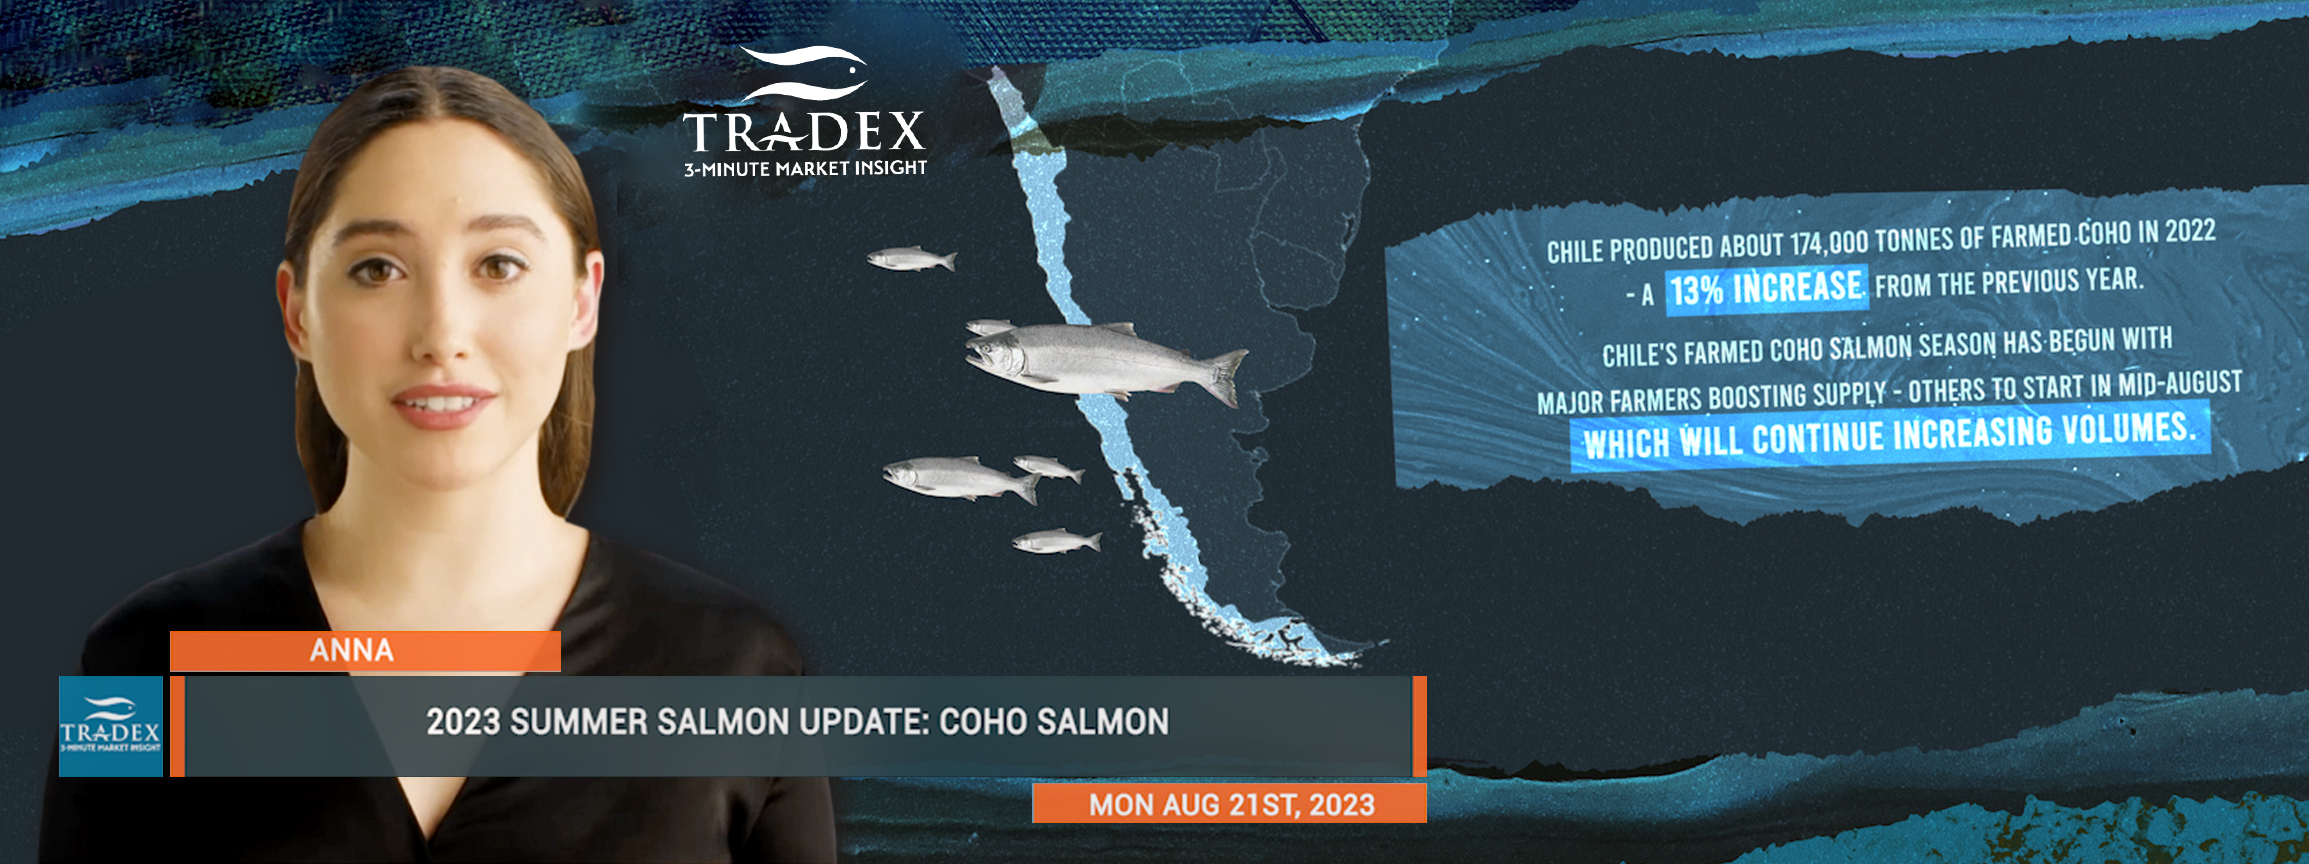 Chile produced about 174,000 MT of Farmed Coho Salmon in 2022...